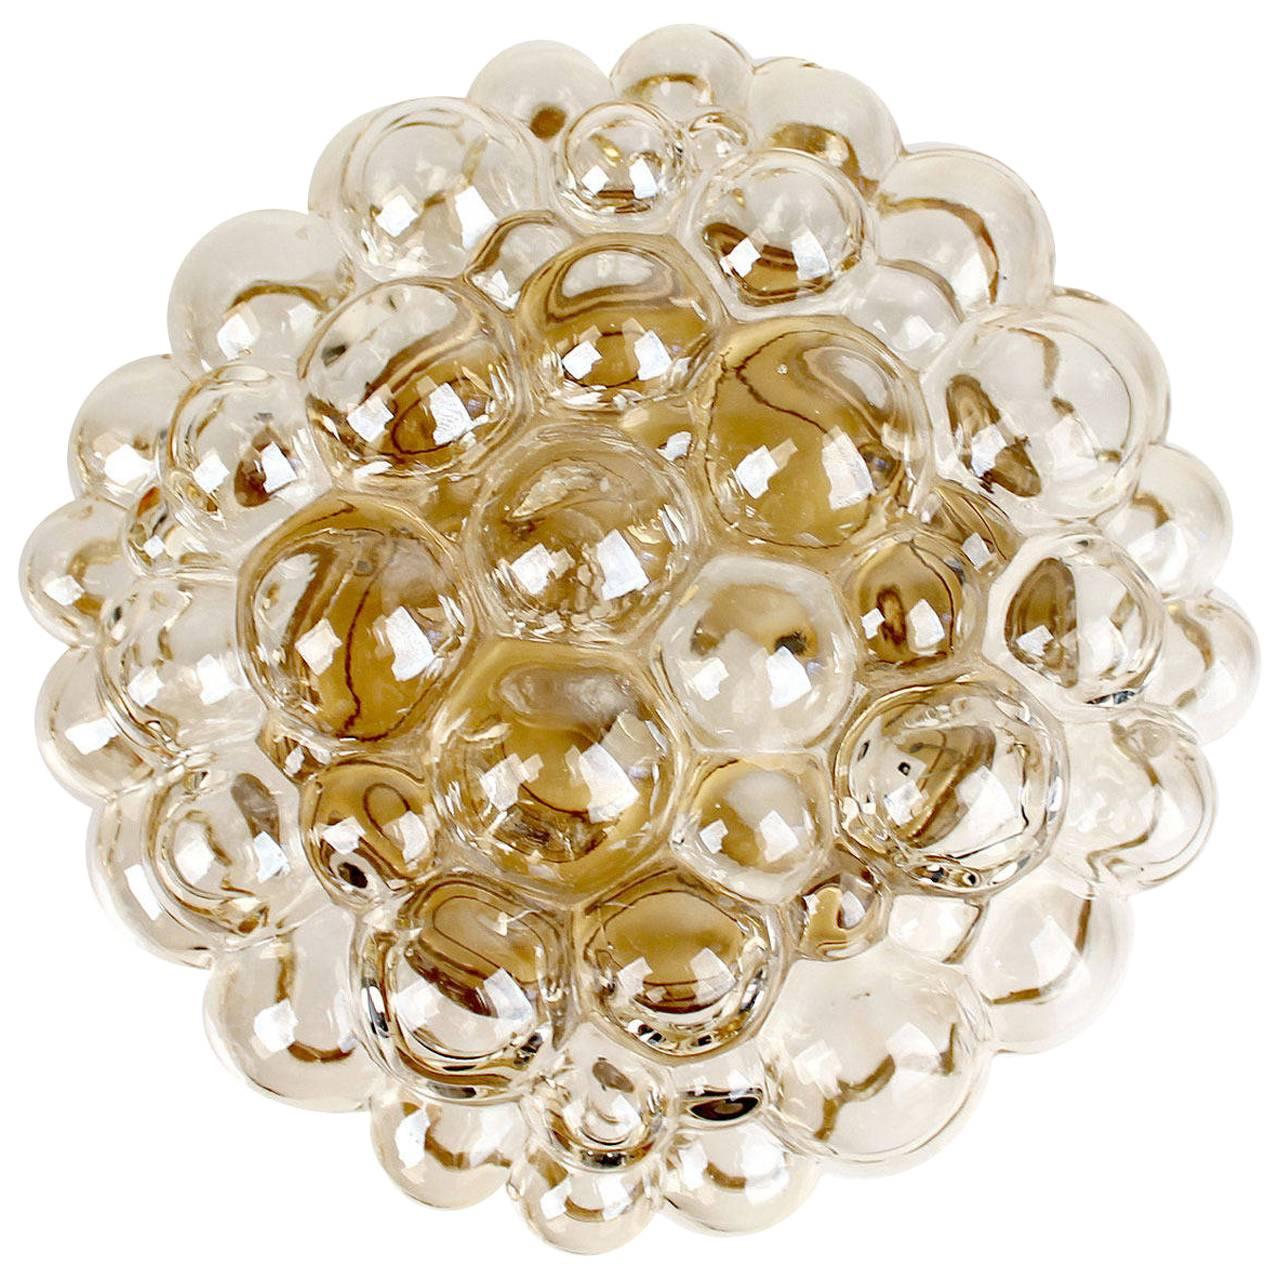 Limburg blown glass sconce, design by Helena Tynell, glass has slight amber color, bronze enameled base 
5.51 in. / 14 cm H
Diameter
12 in. / 30 cm 
Two standard bulbs up tp 60 watts each


With the 1960s came the accentuated use of glass elements